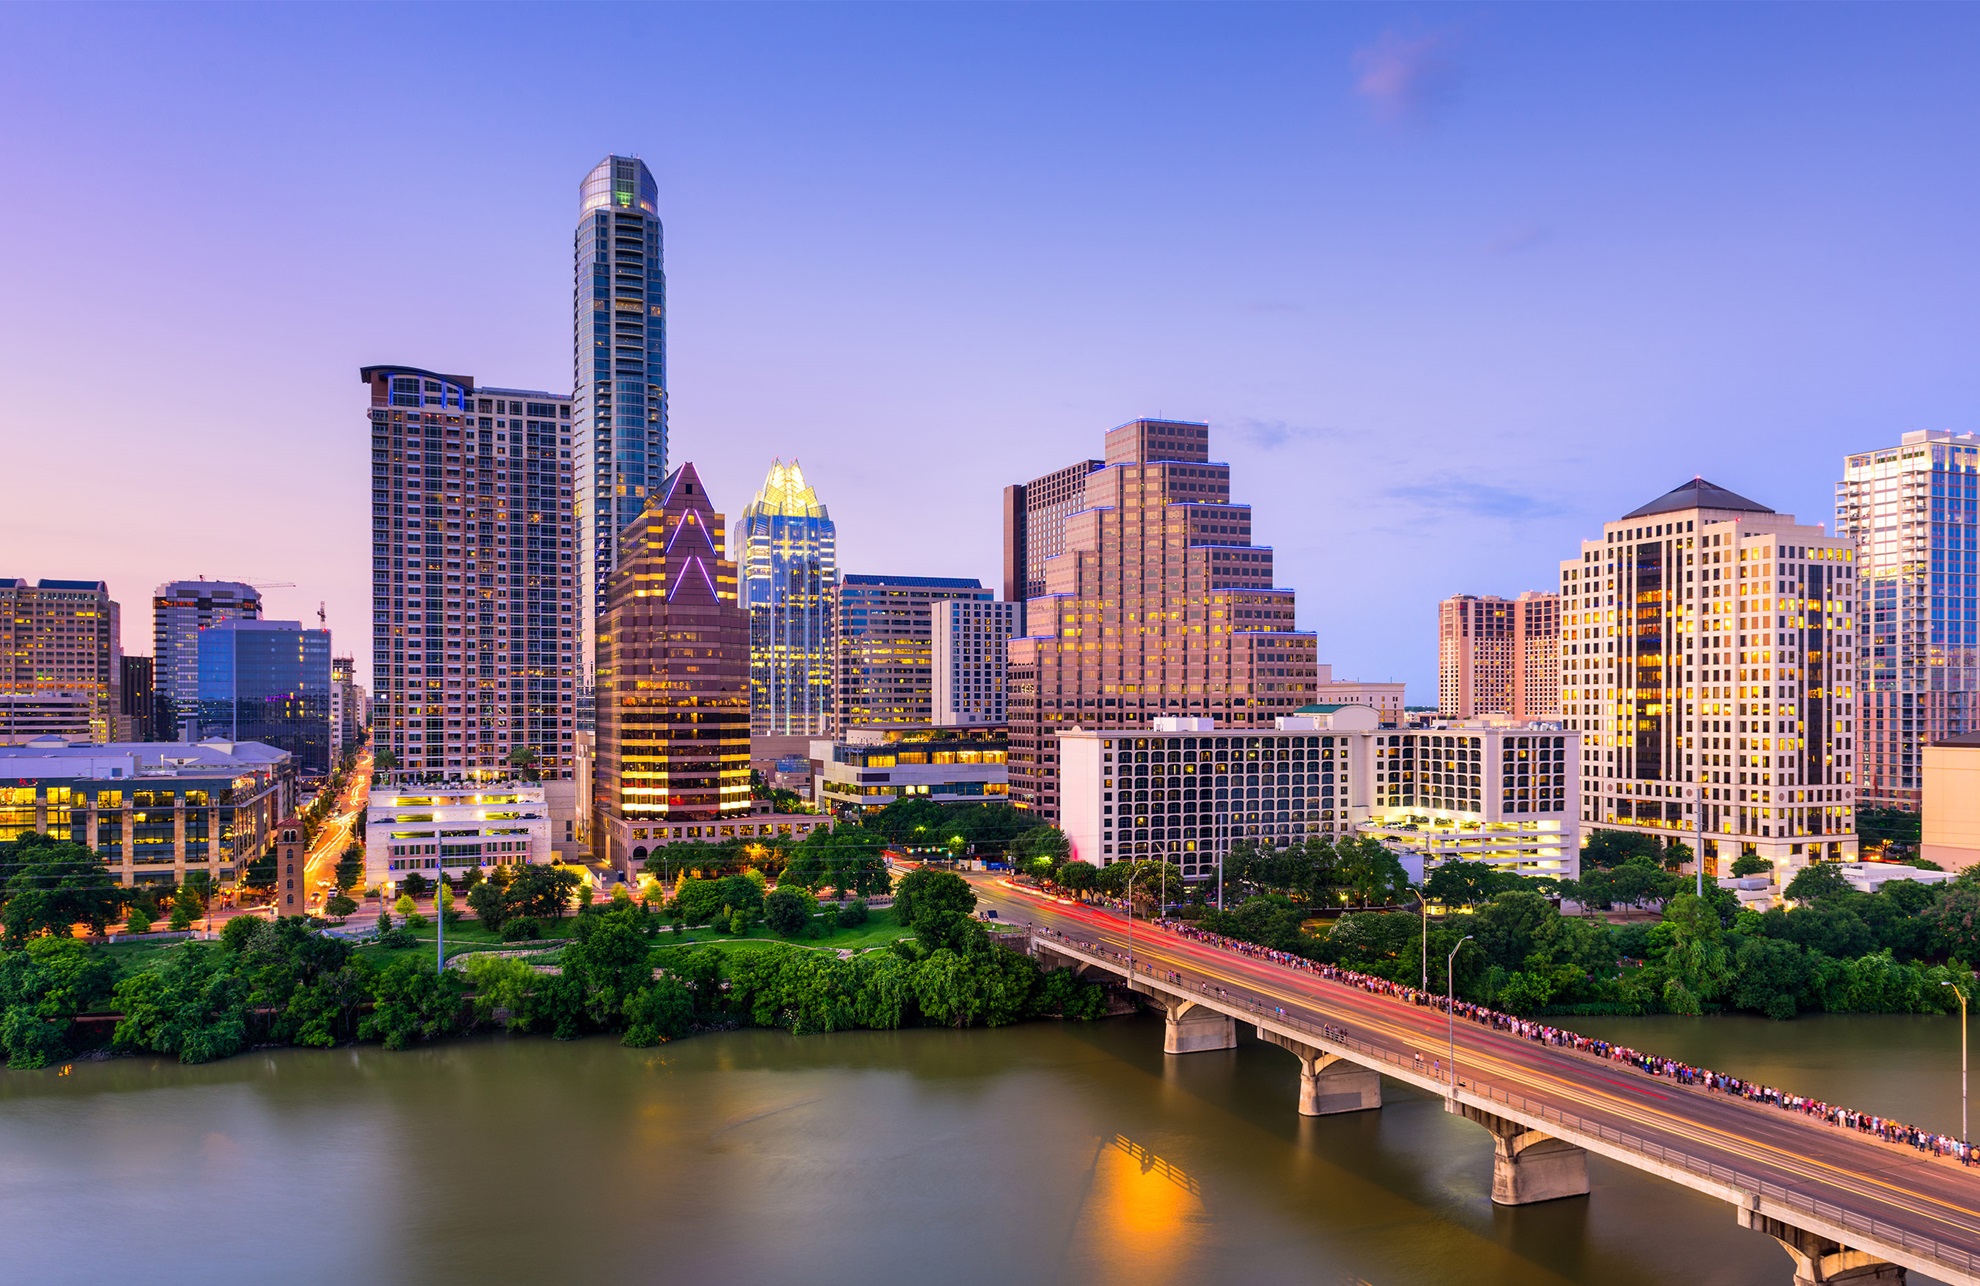 Top 5 Things to Do in Downtown Austin